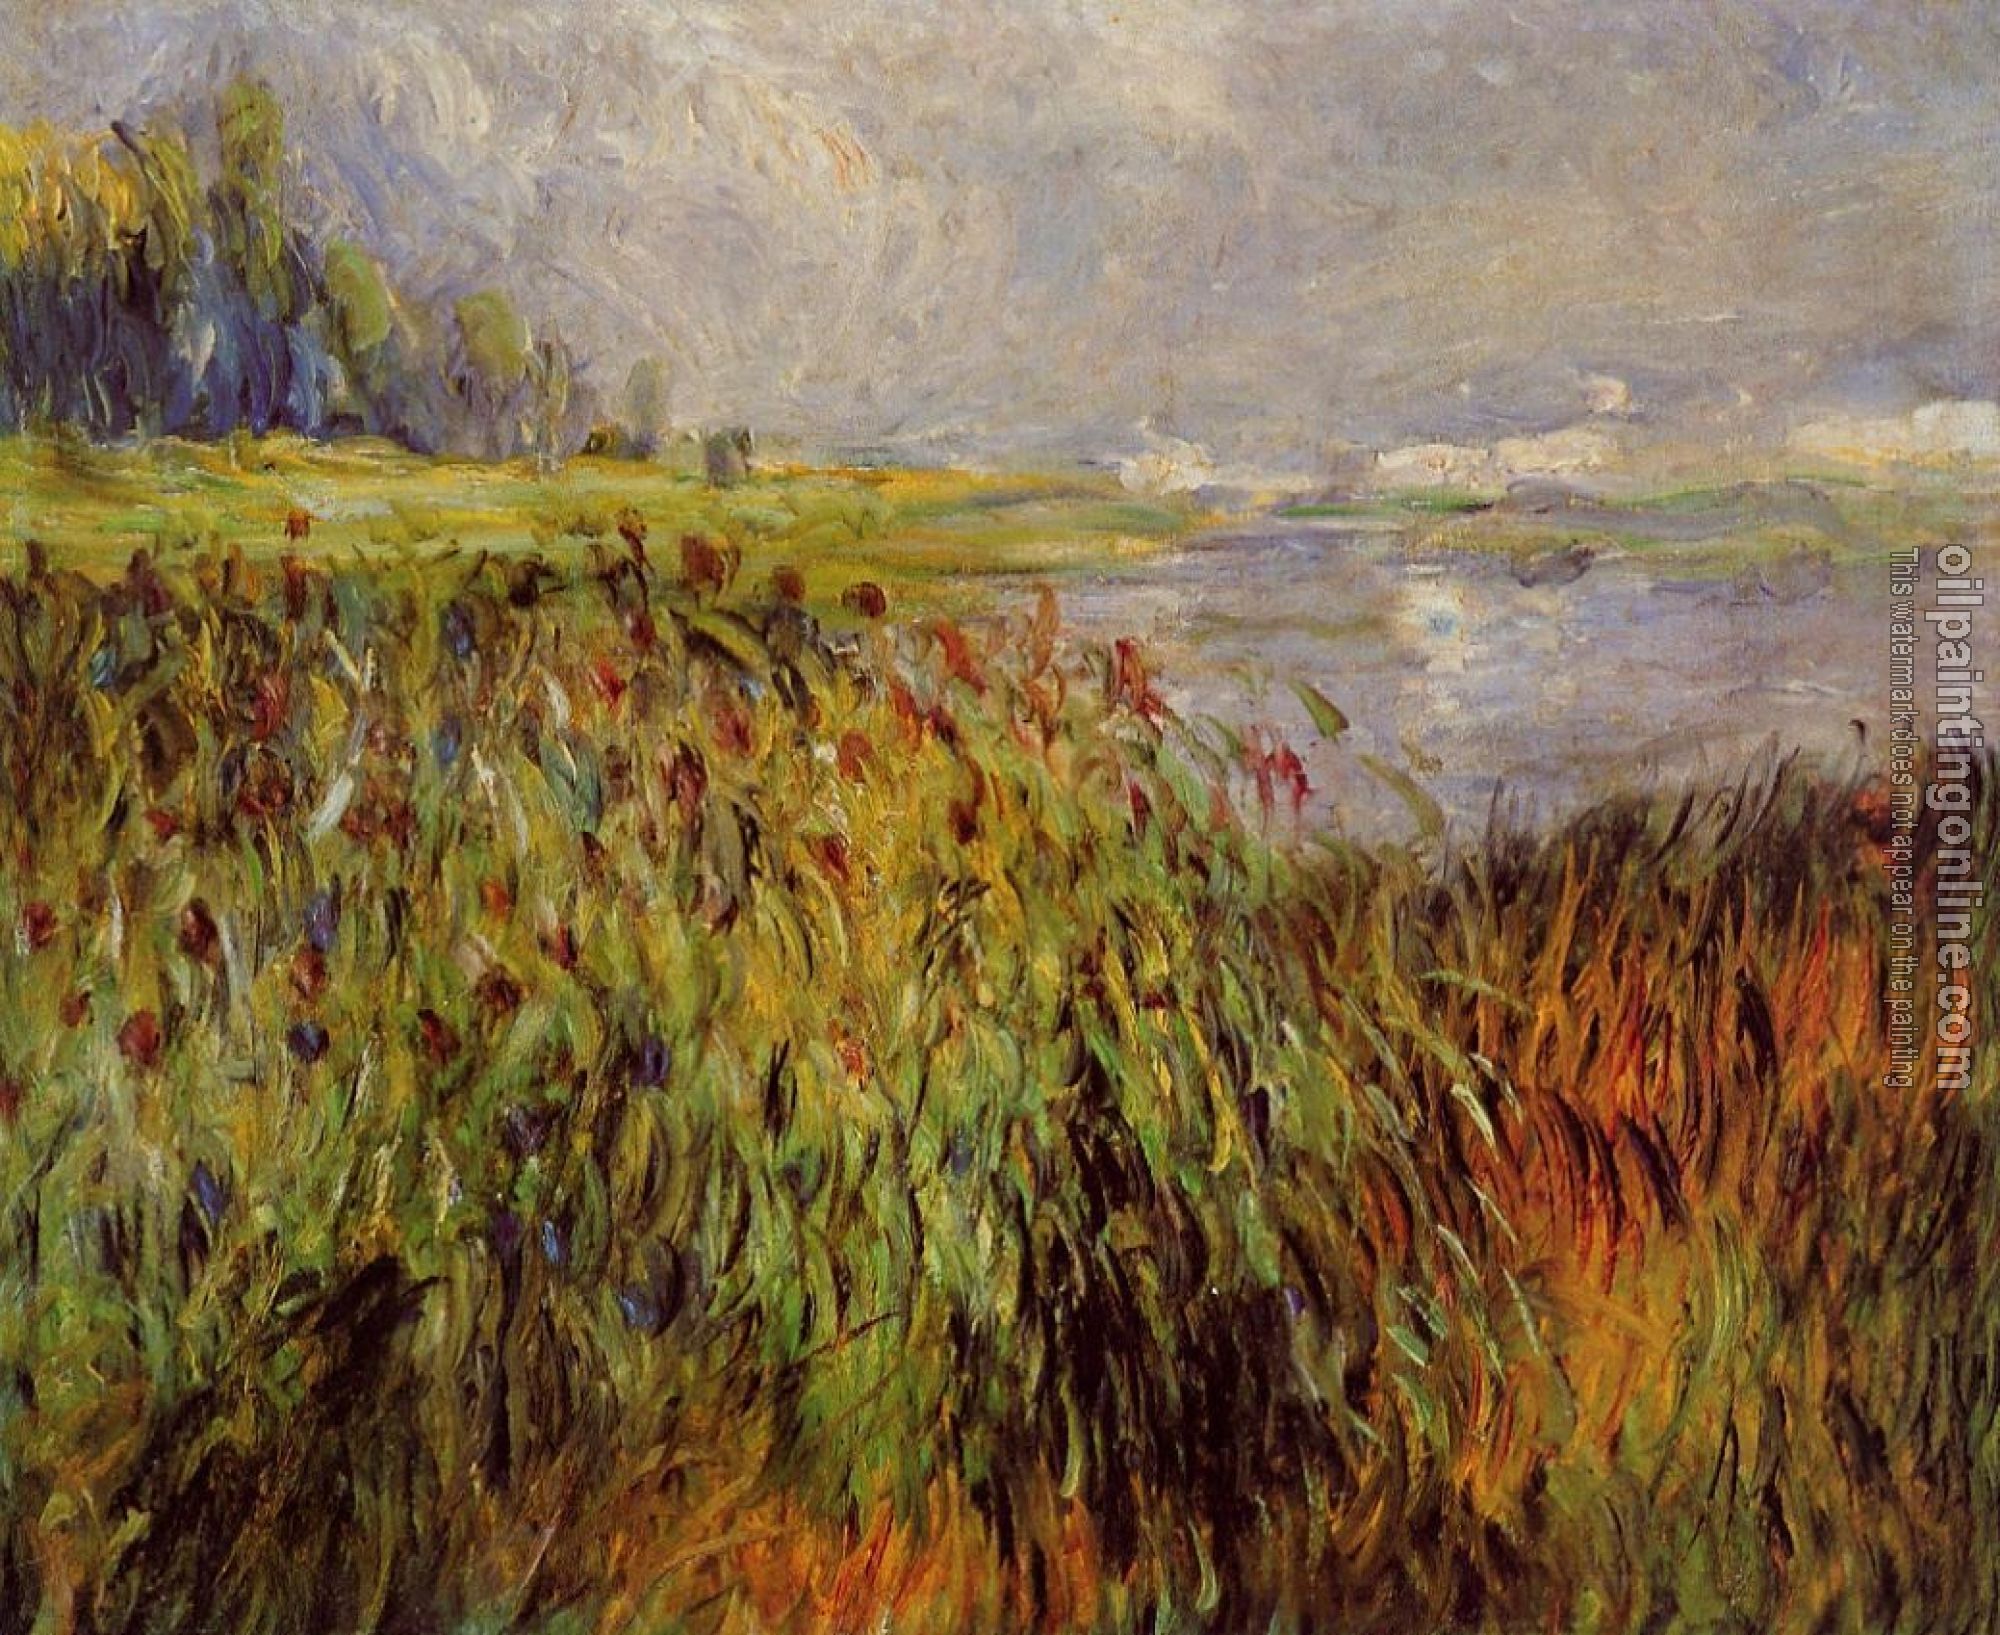 Renoir, Pierre Auguste - Bulrushes on the Banks of the Seine